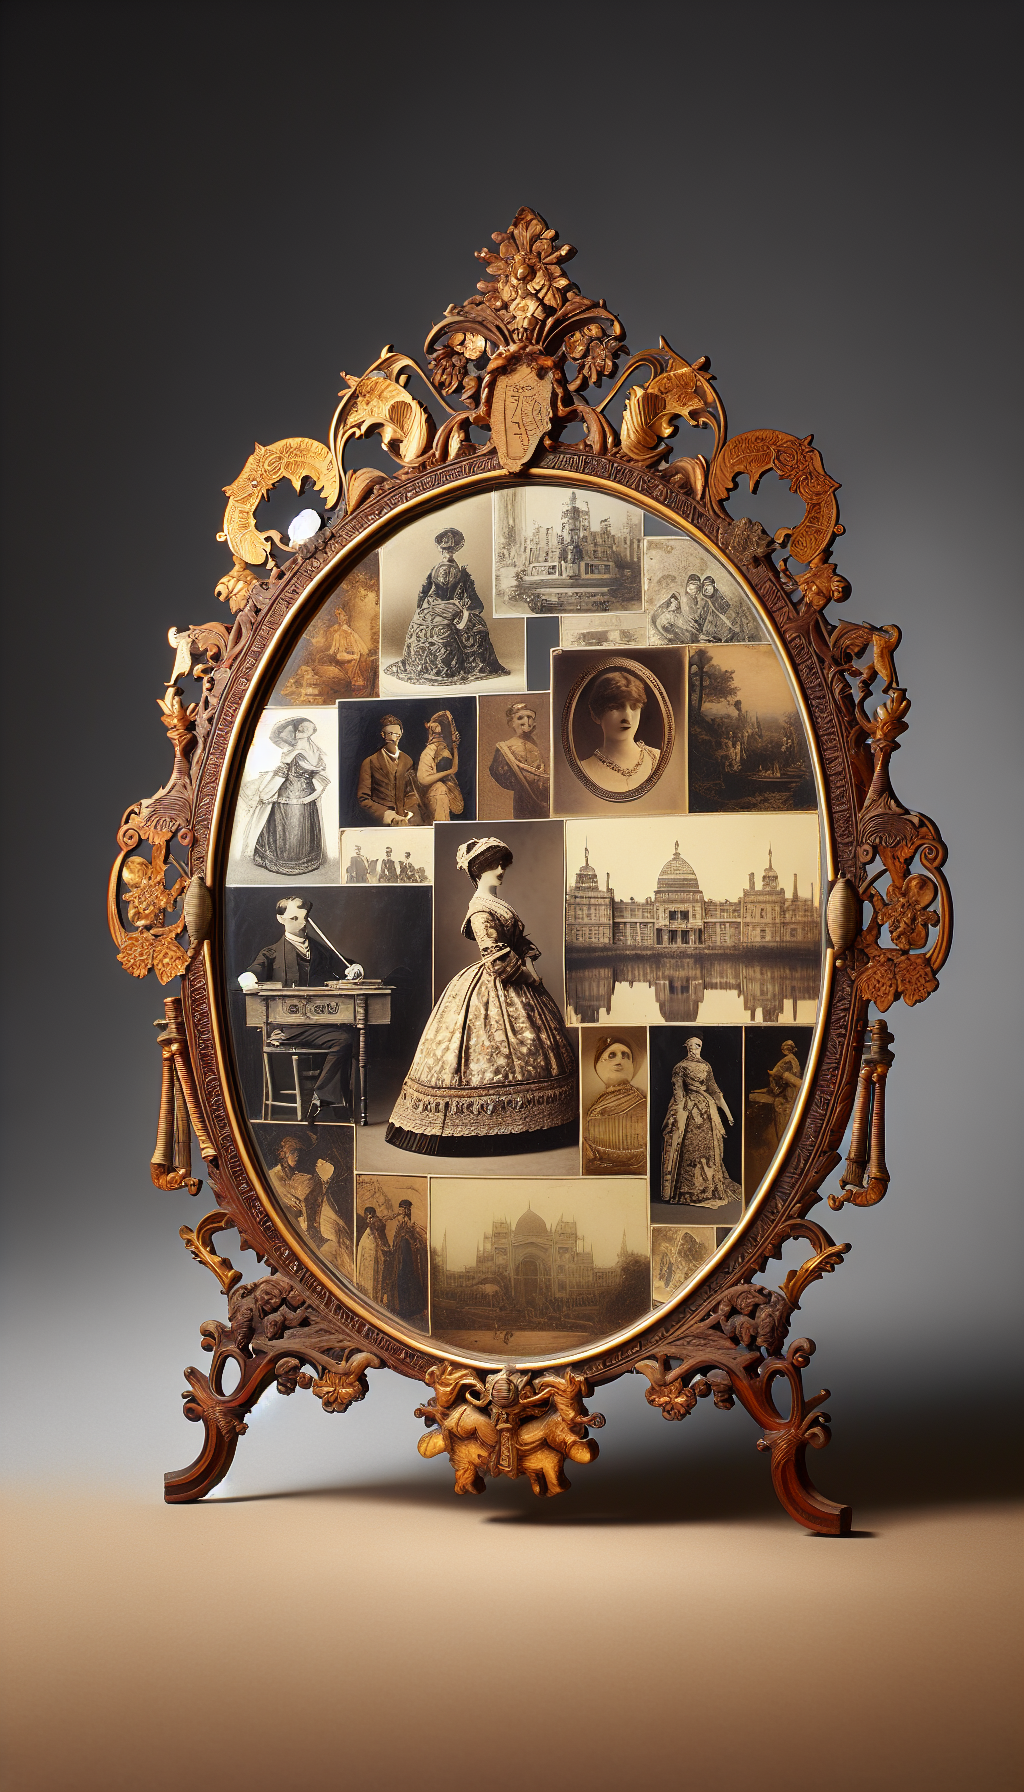 A vintage mirror stands prominently, its antique frame ornately carved with historical scenes. Within its reflective surface, a collage of sepia-toned pictorial snippets unfolds—a Victorian lady, a medieval craftsman, hints of royal palaces—each evoking a past era. Faint golden lines intersect, forming the silhouette of a price tag, subtly indicating the mirror's esteemed value.